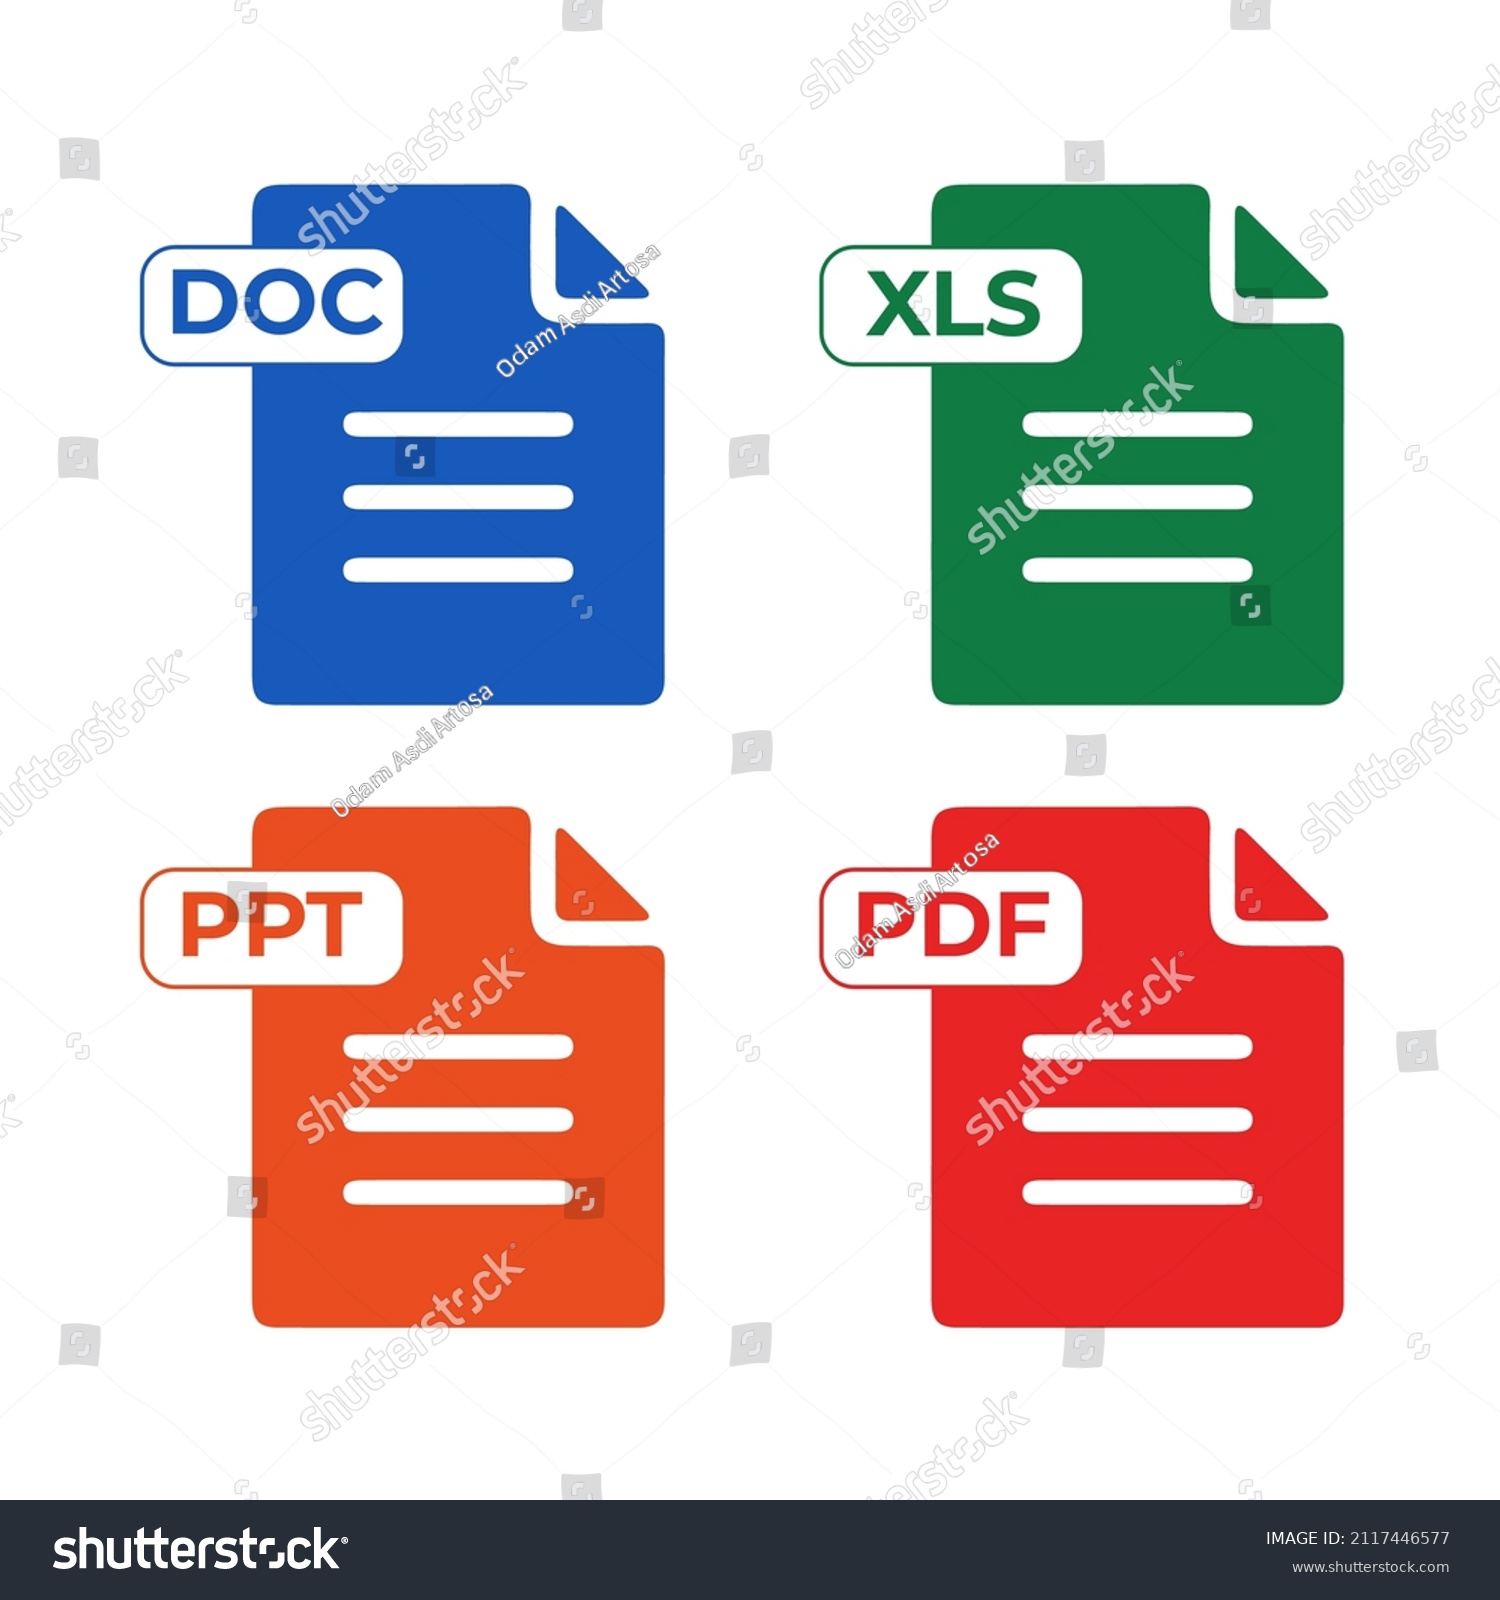 SVG of Set of format and extension of documents. Microsoft Word .doc Microsoft Excel .xls Microsoft PowerPoint .ppt .pdf Adobe Acrobat, Nitro Reader, Foxit Reader. svg